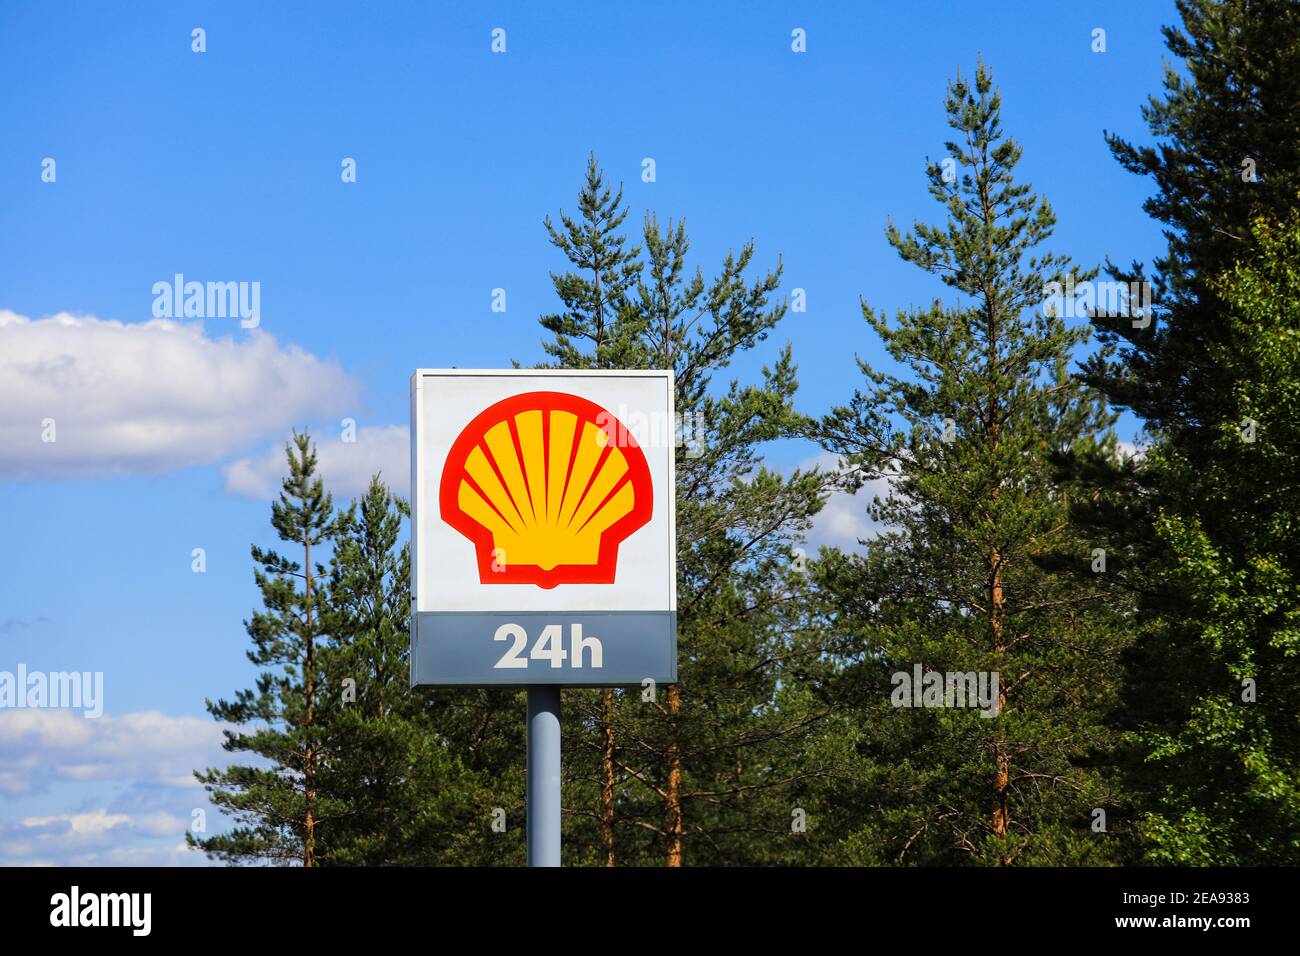 Royal Dutch Shell, commonly known Shell, British-Dutch multinational oil and gas company. Logo against sky and forest by Highway 4, Finland. 2017. Stock Photo